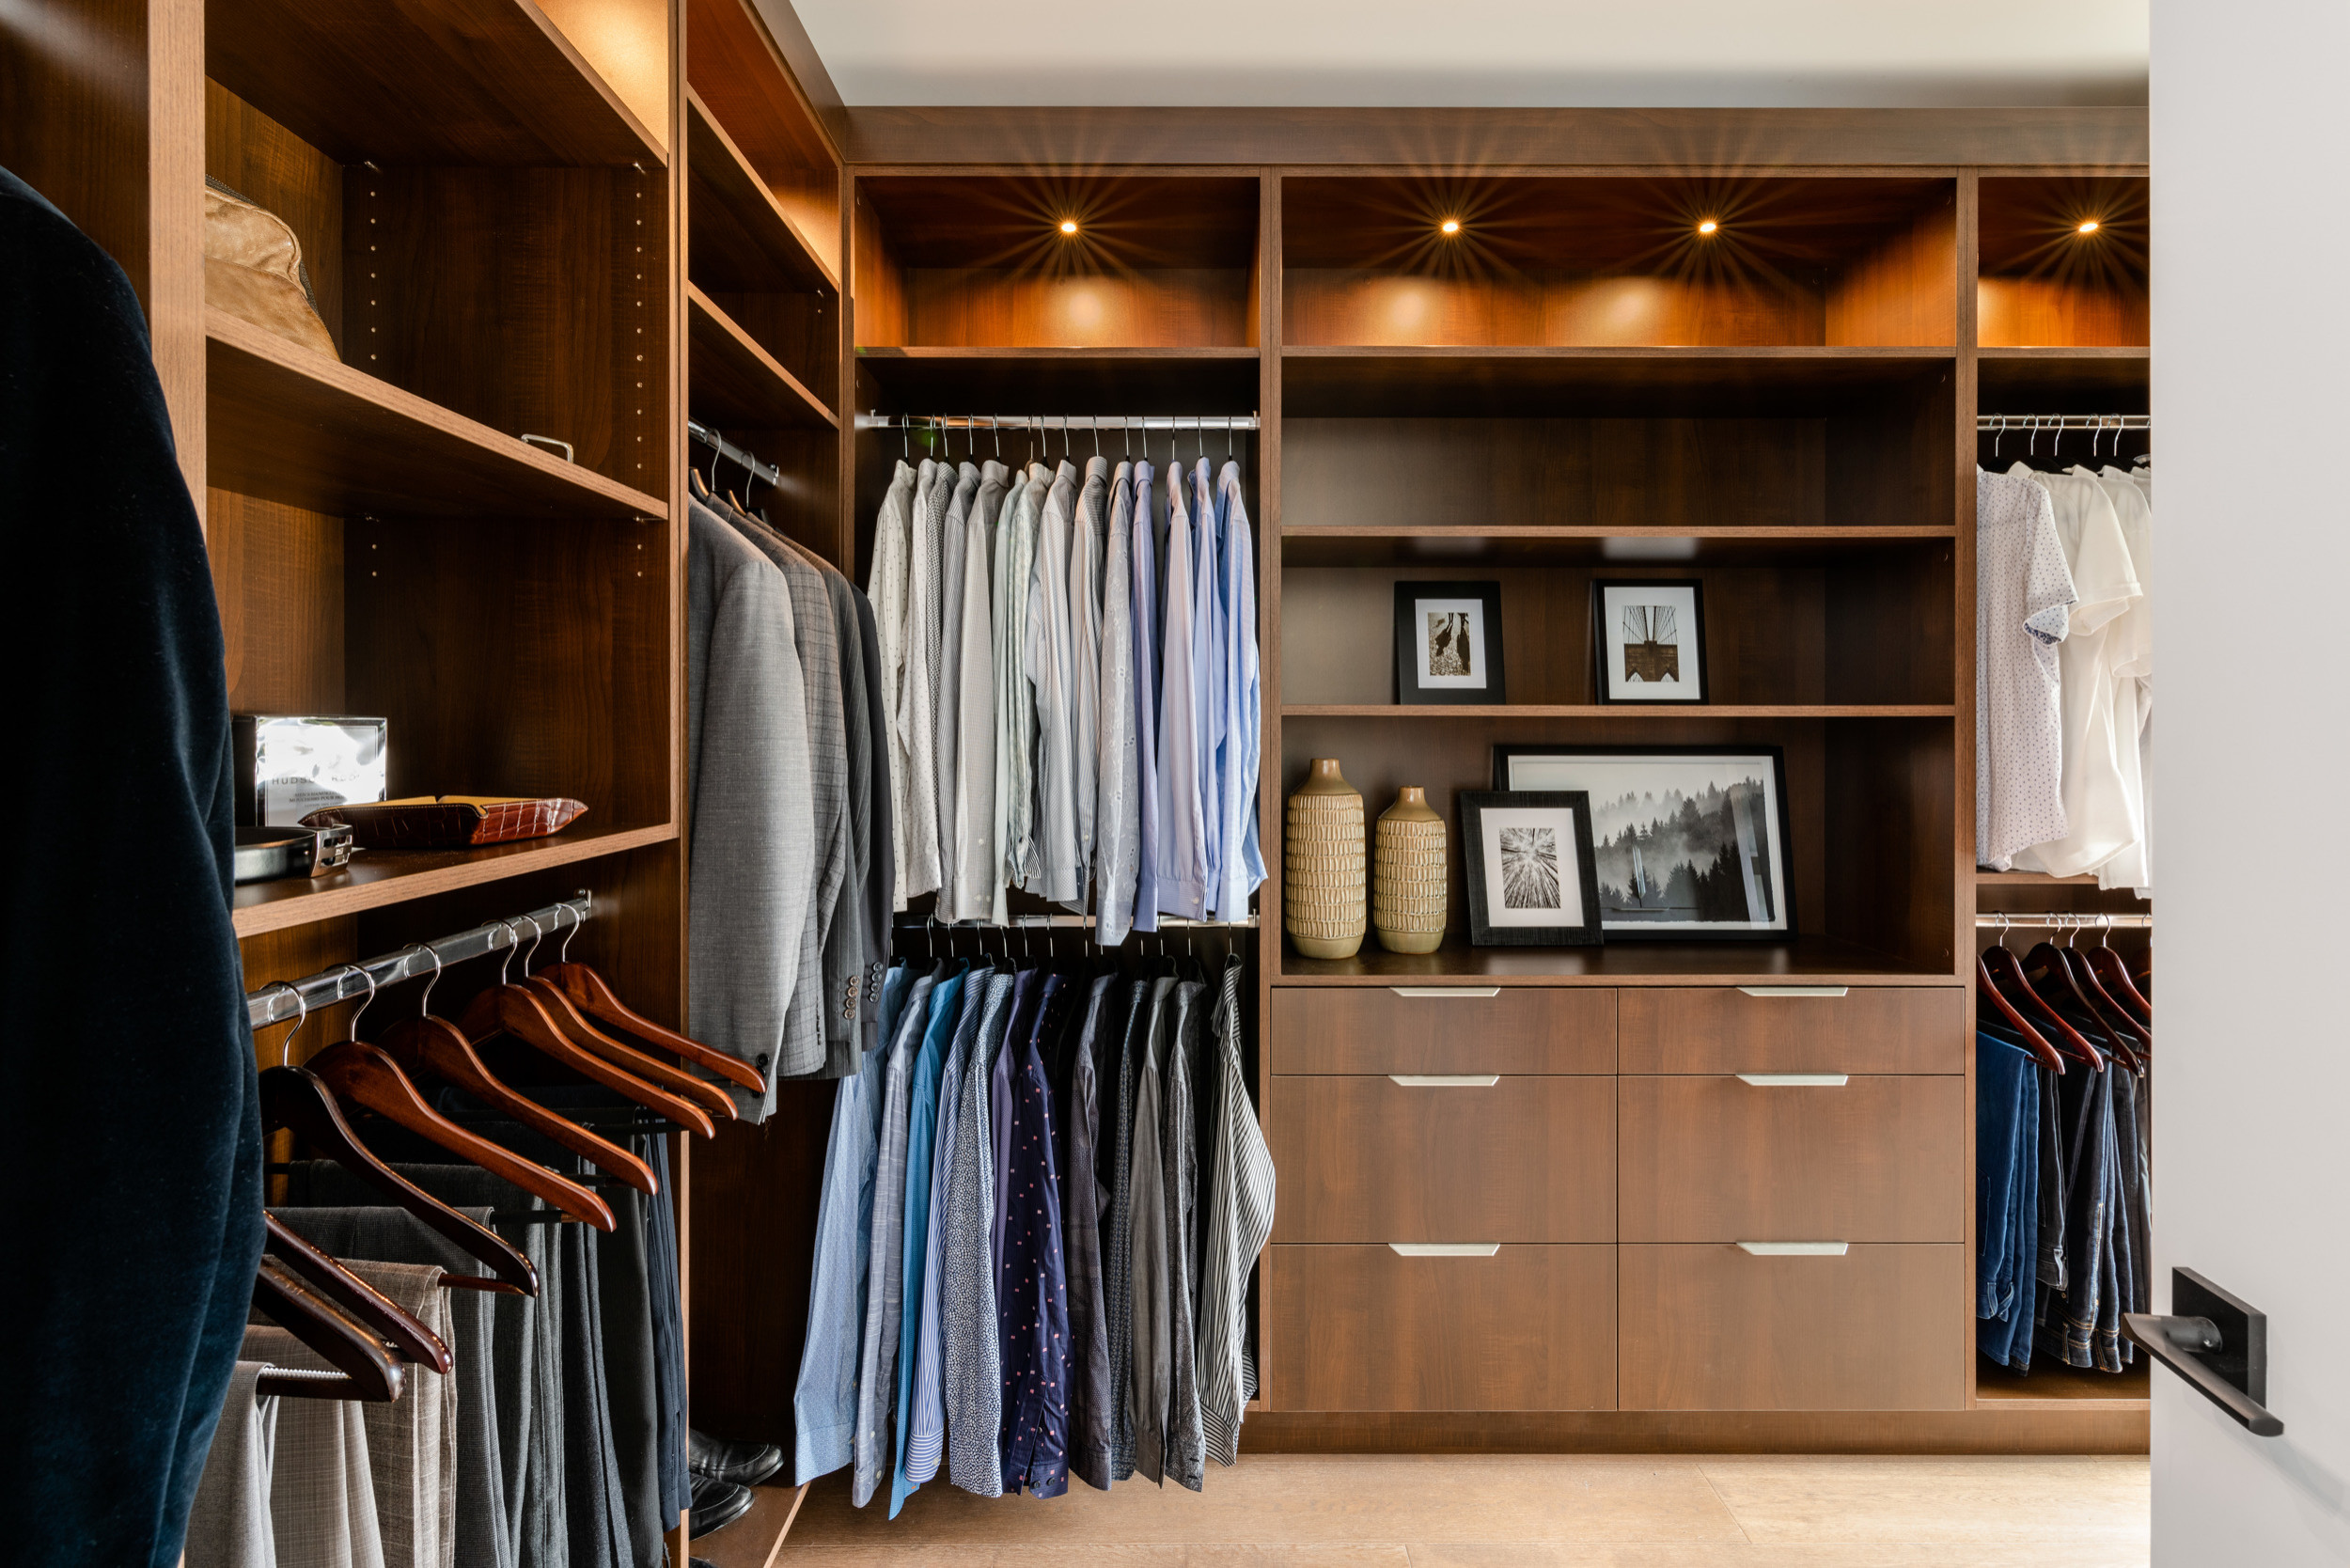 18 Deluxe Contemporary Walk-in Closet Designs You Will Definitely Want